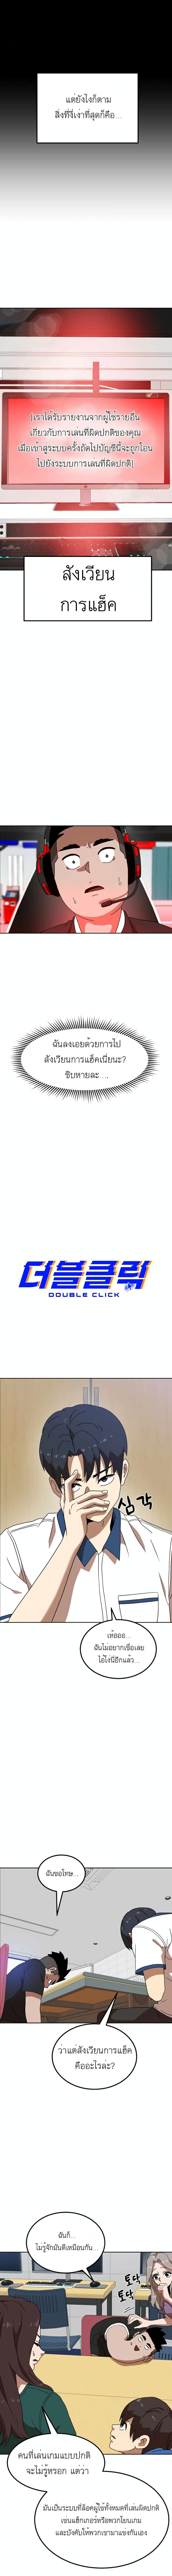 Double Click33 (4)